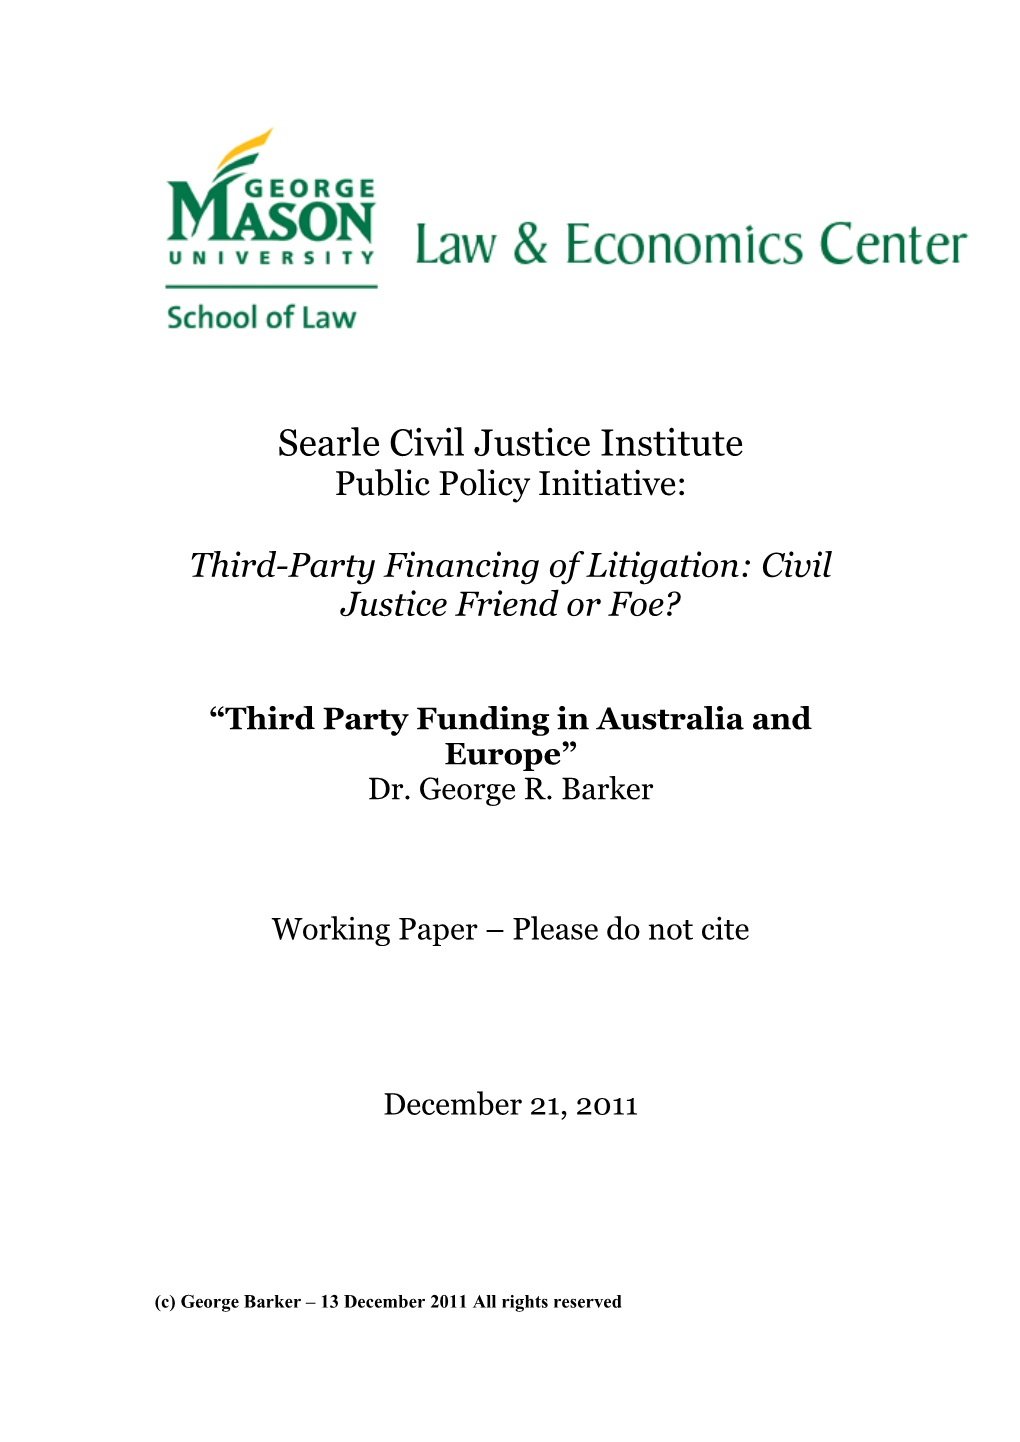 Third Party Funding in Australia and Europe” Dr